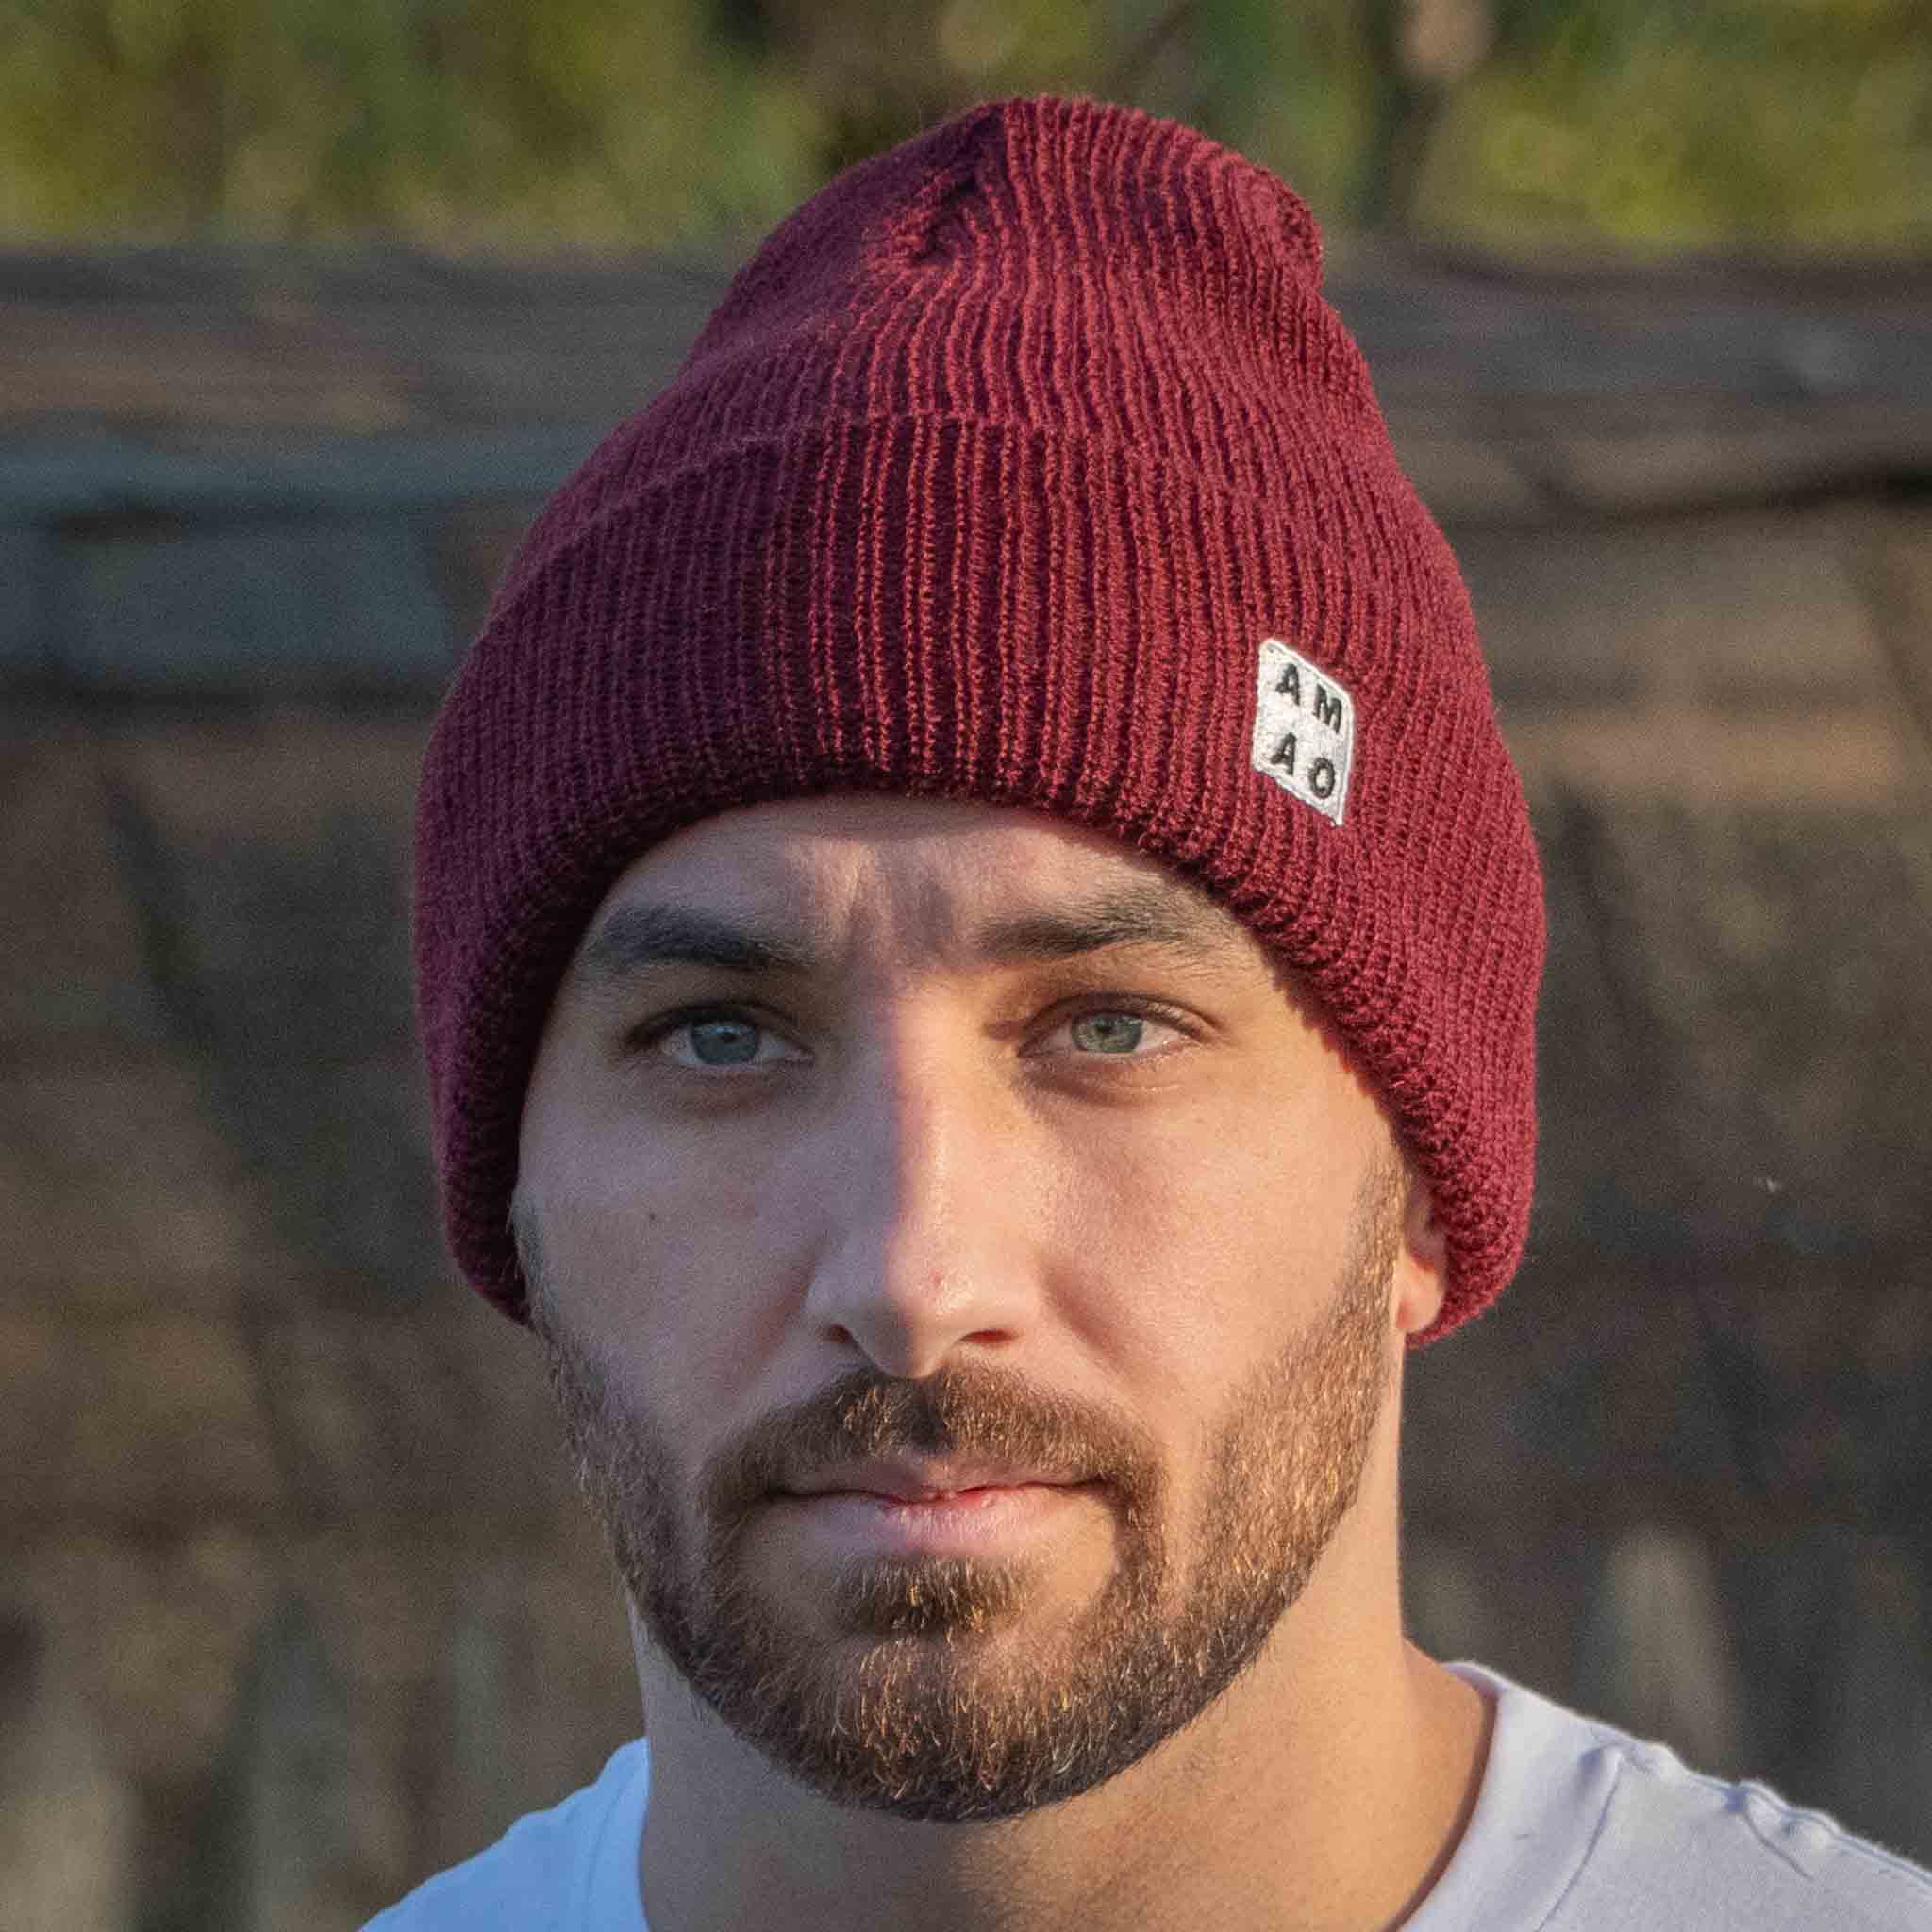 AMAO Wool Workwear Knit Hat Burgundy - Compare at $60